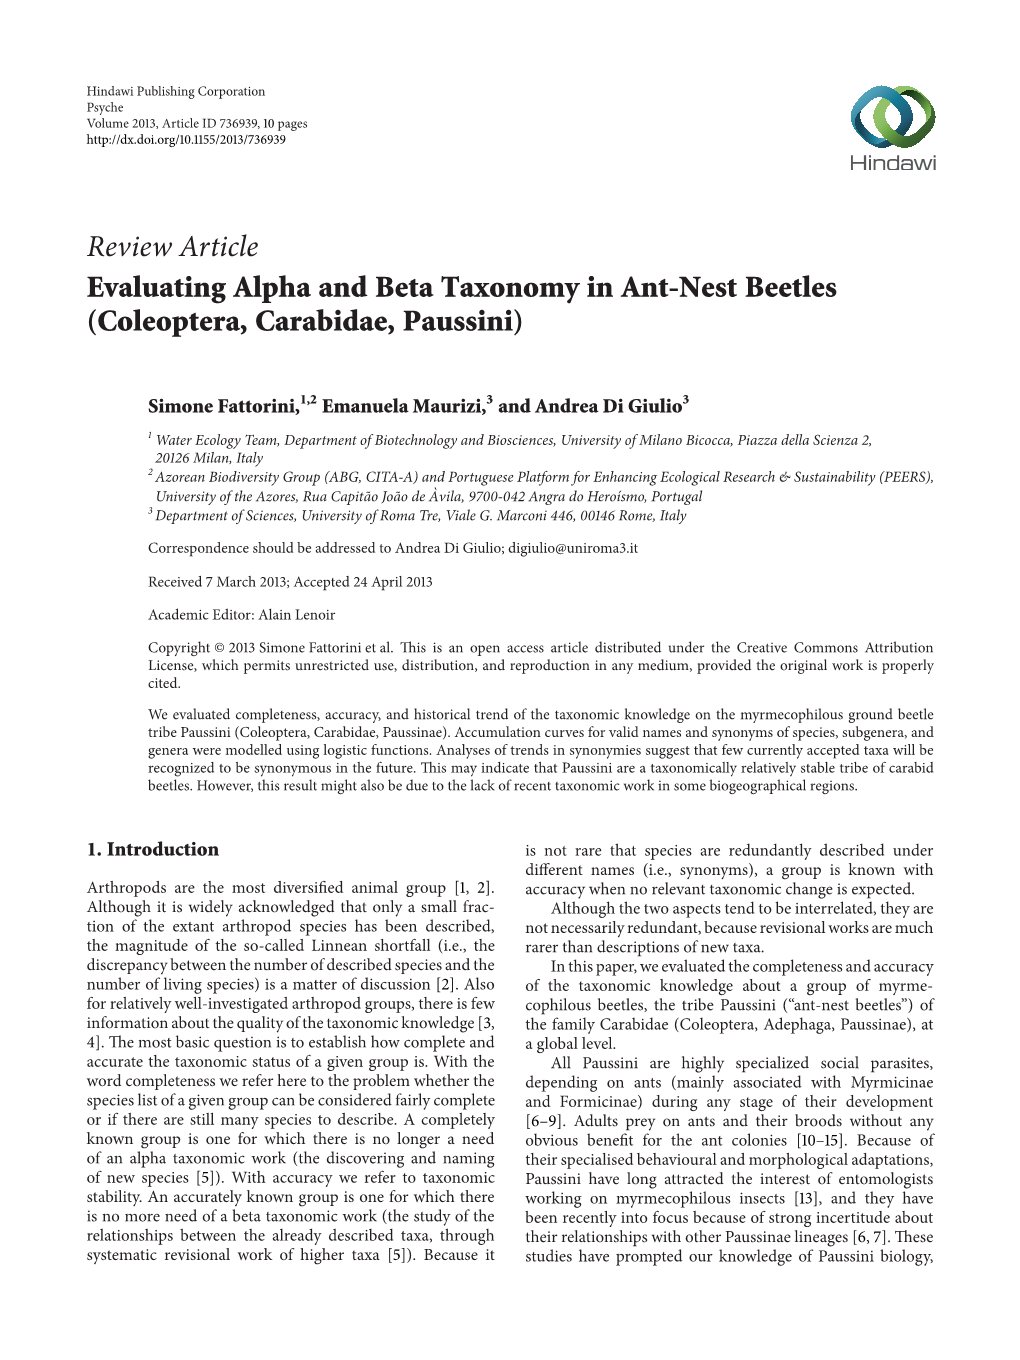 Review Article Evaluating Alpha and Beta Taxonomy in Ant-Nest Beetles (Coleoptera, Carabidae, Paussini)